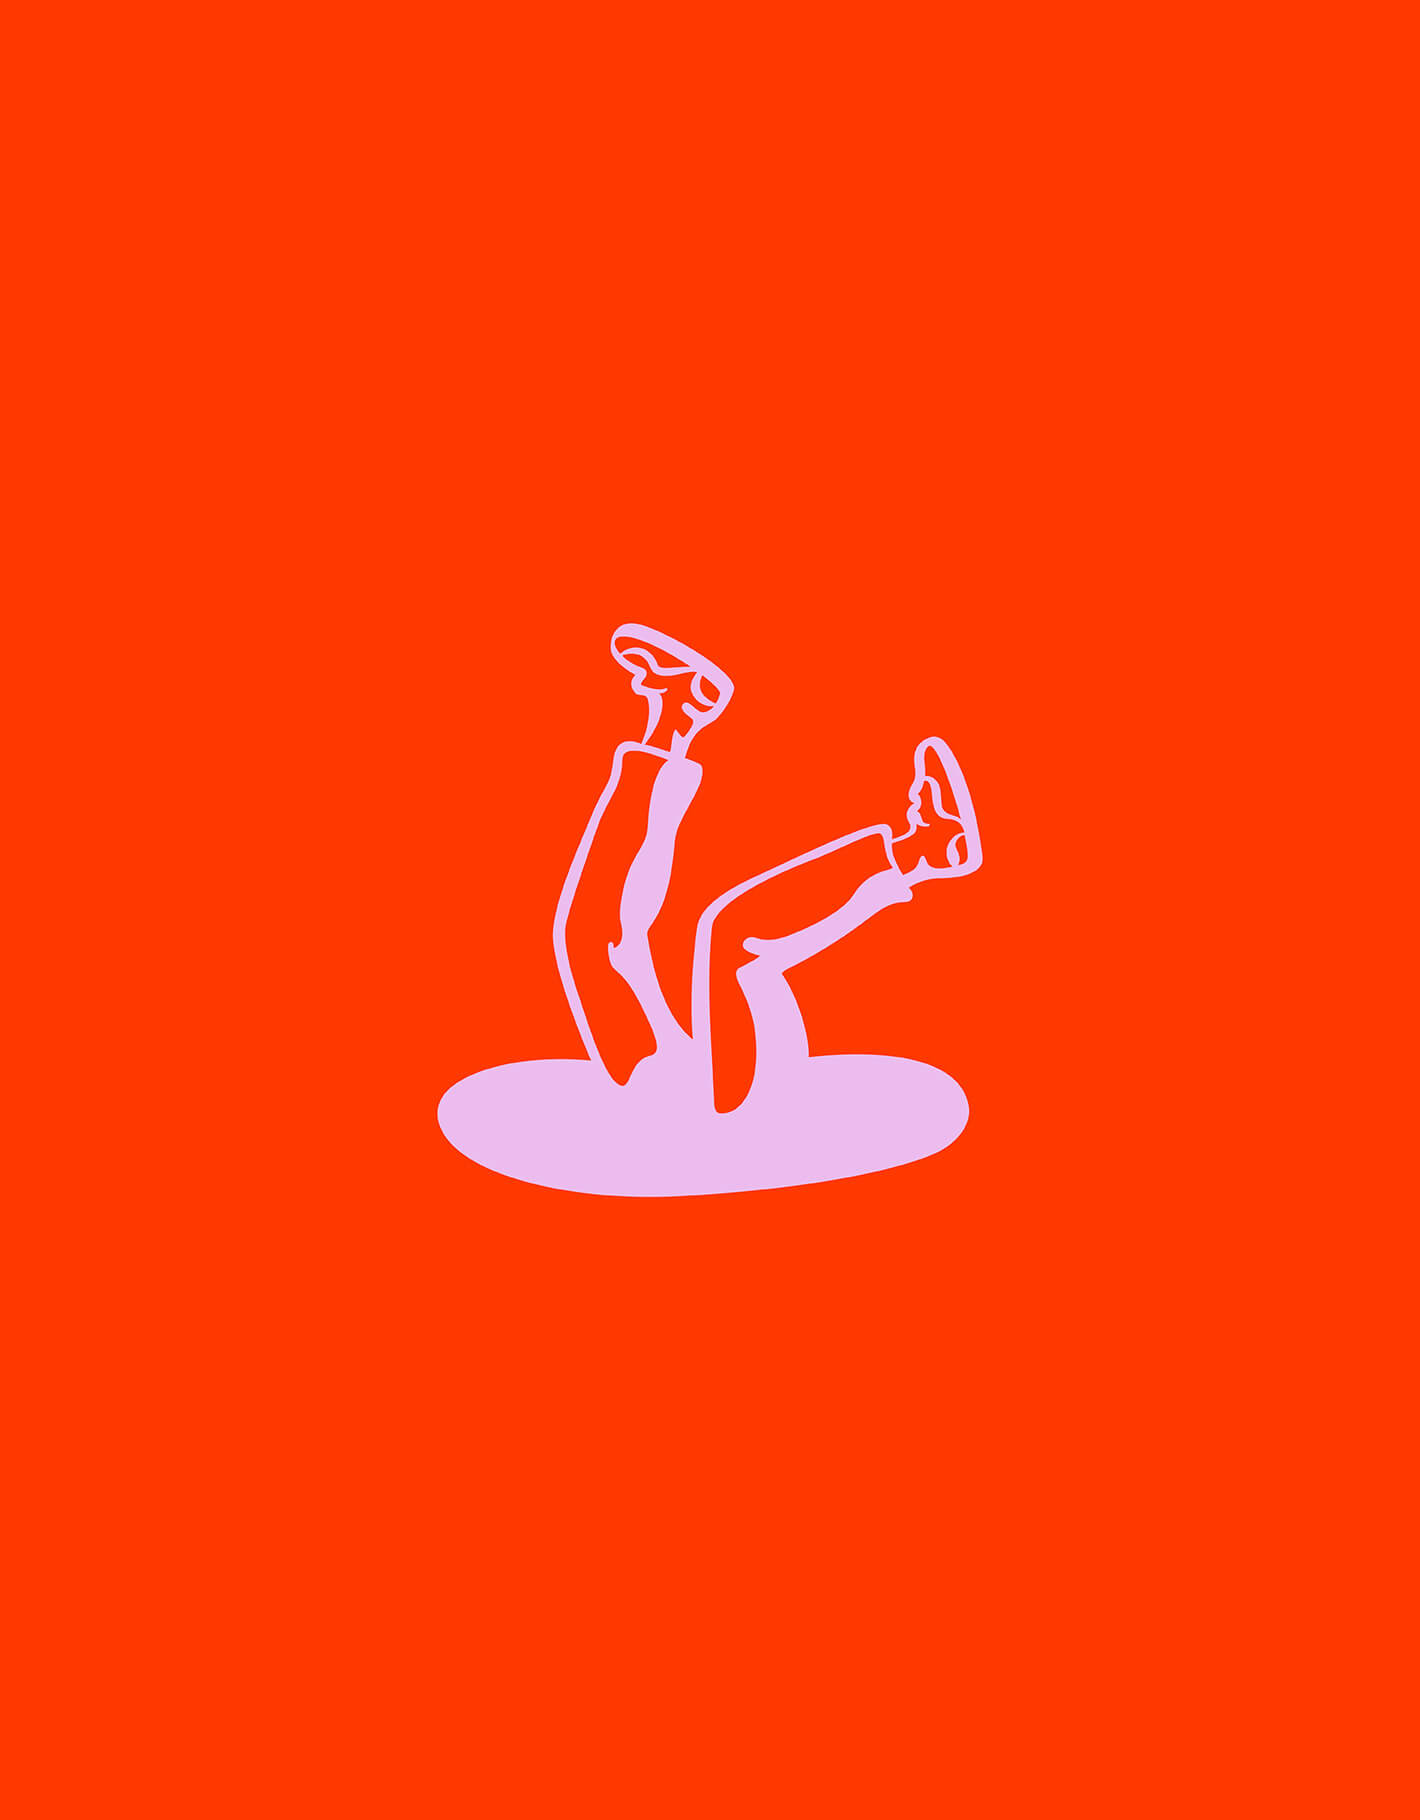 Brand identity case study for Parallel shows the brand icon in pink on a bright red background. A pair of legs in sneakers falls into a black hole.